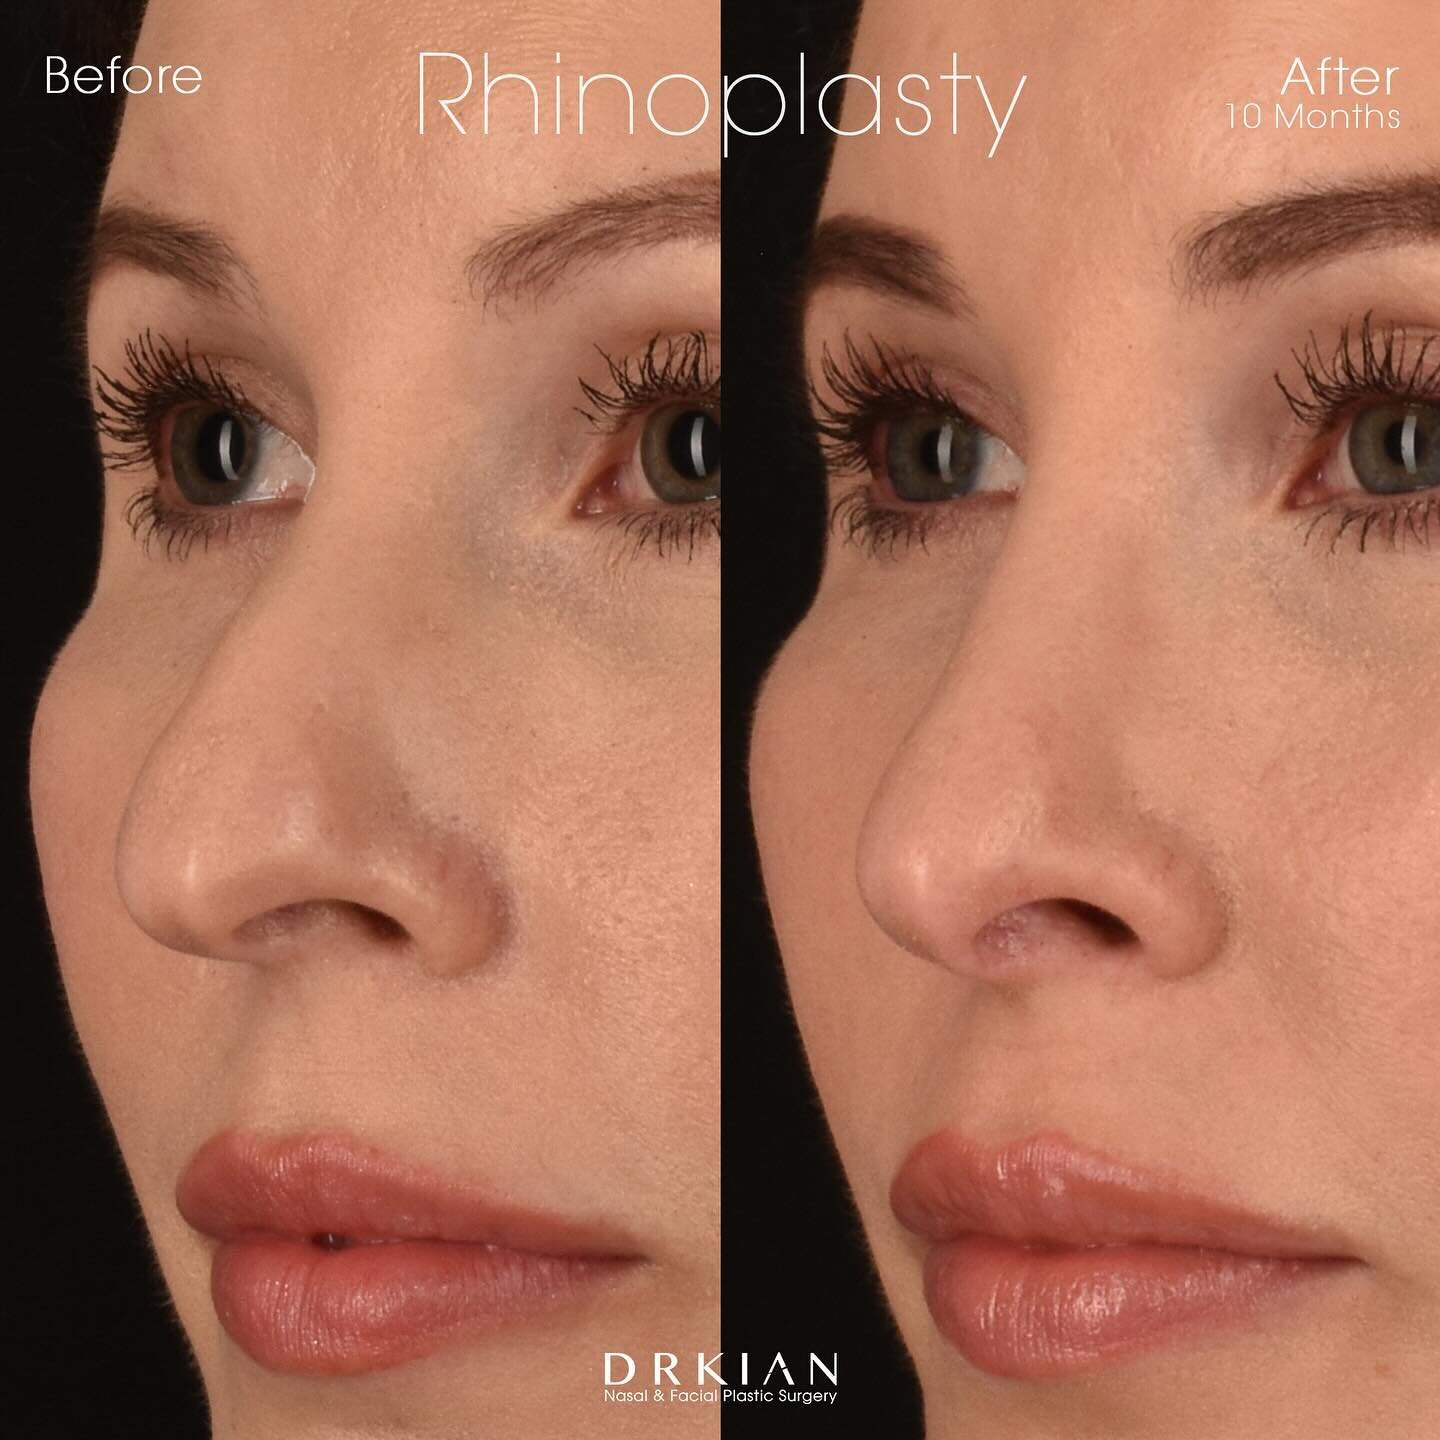 I had the pleasure of seeing my beautiful patient Serene this morning, all the way from San Diego. She is 10 months after undergoing #UltrasonicRhinoplasty for tip refinement, bridge straightening and bump reduction. 

&ldquo;I am so thrilled with my